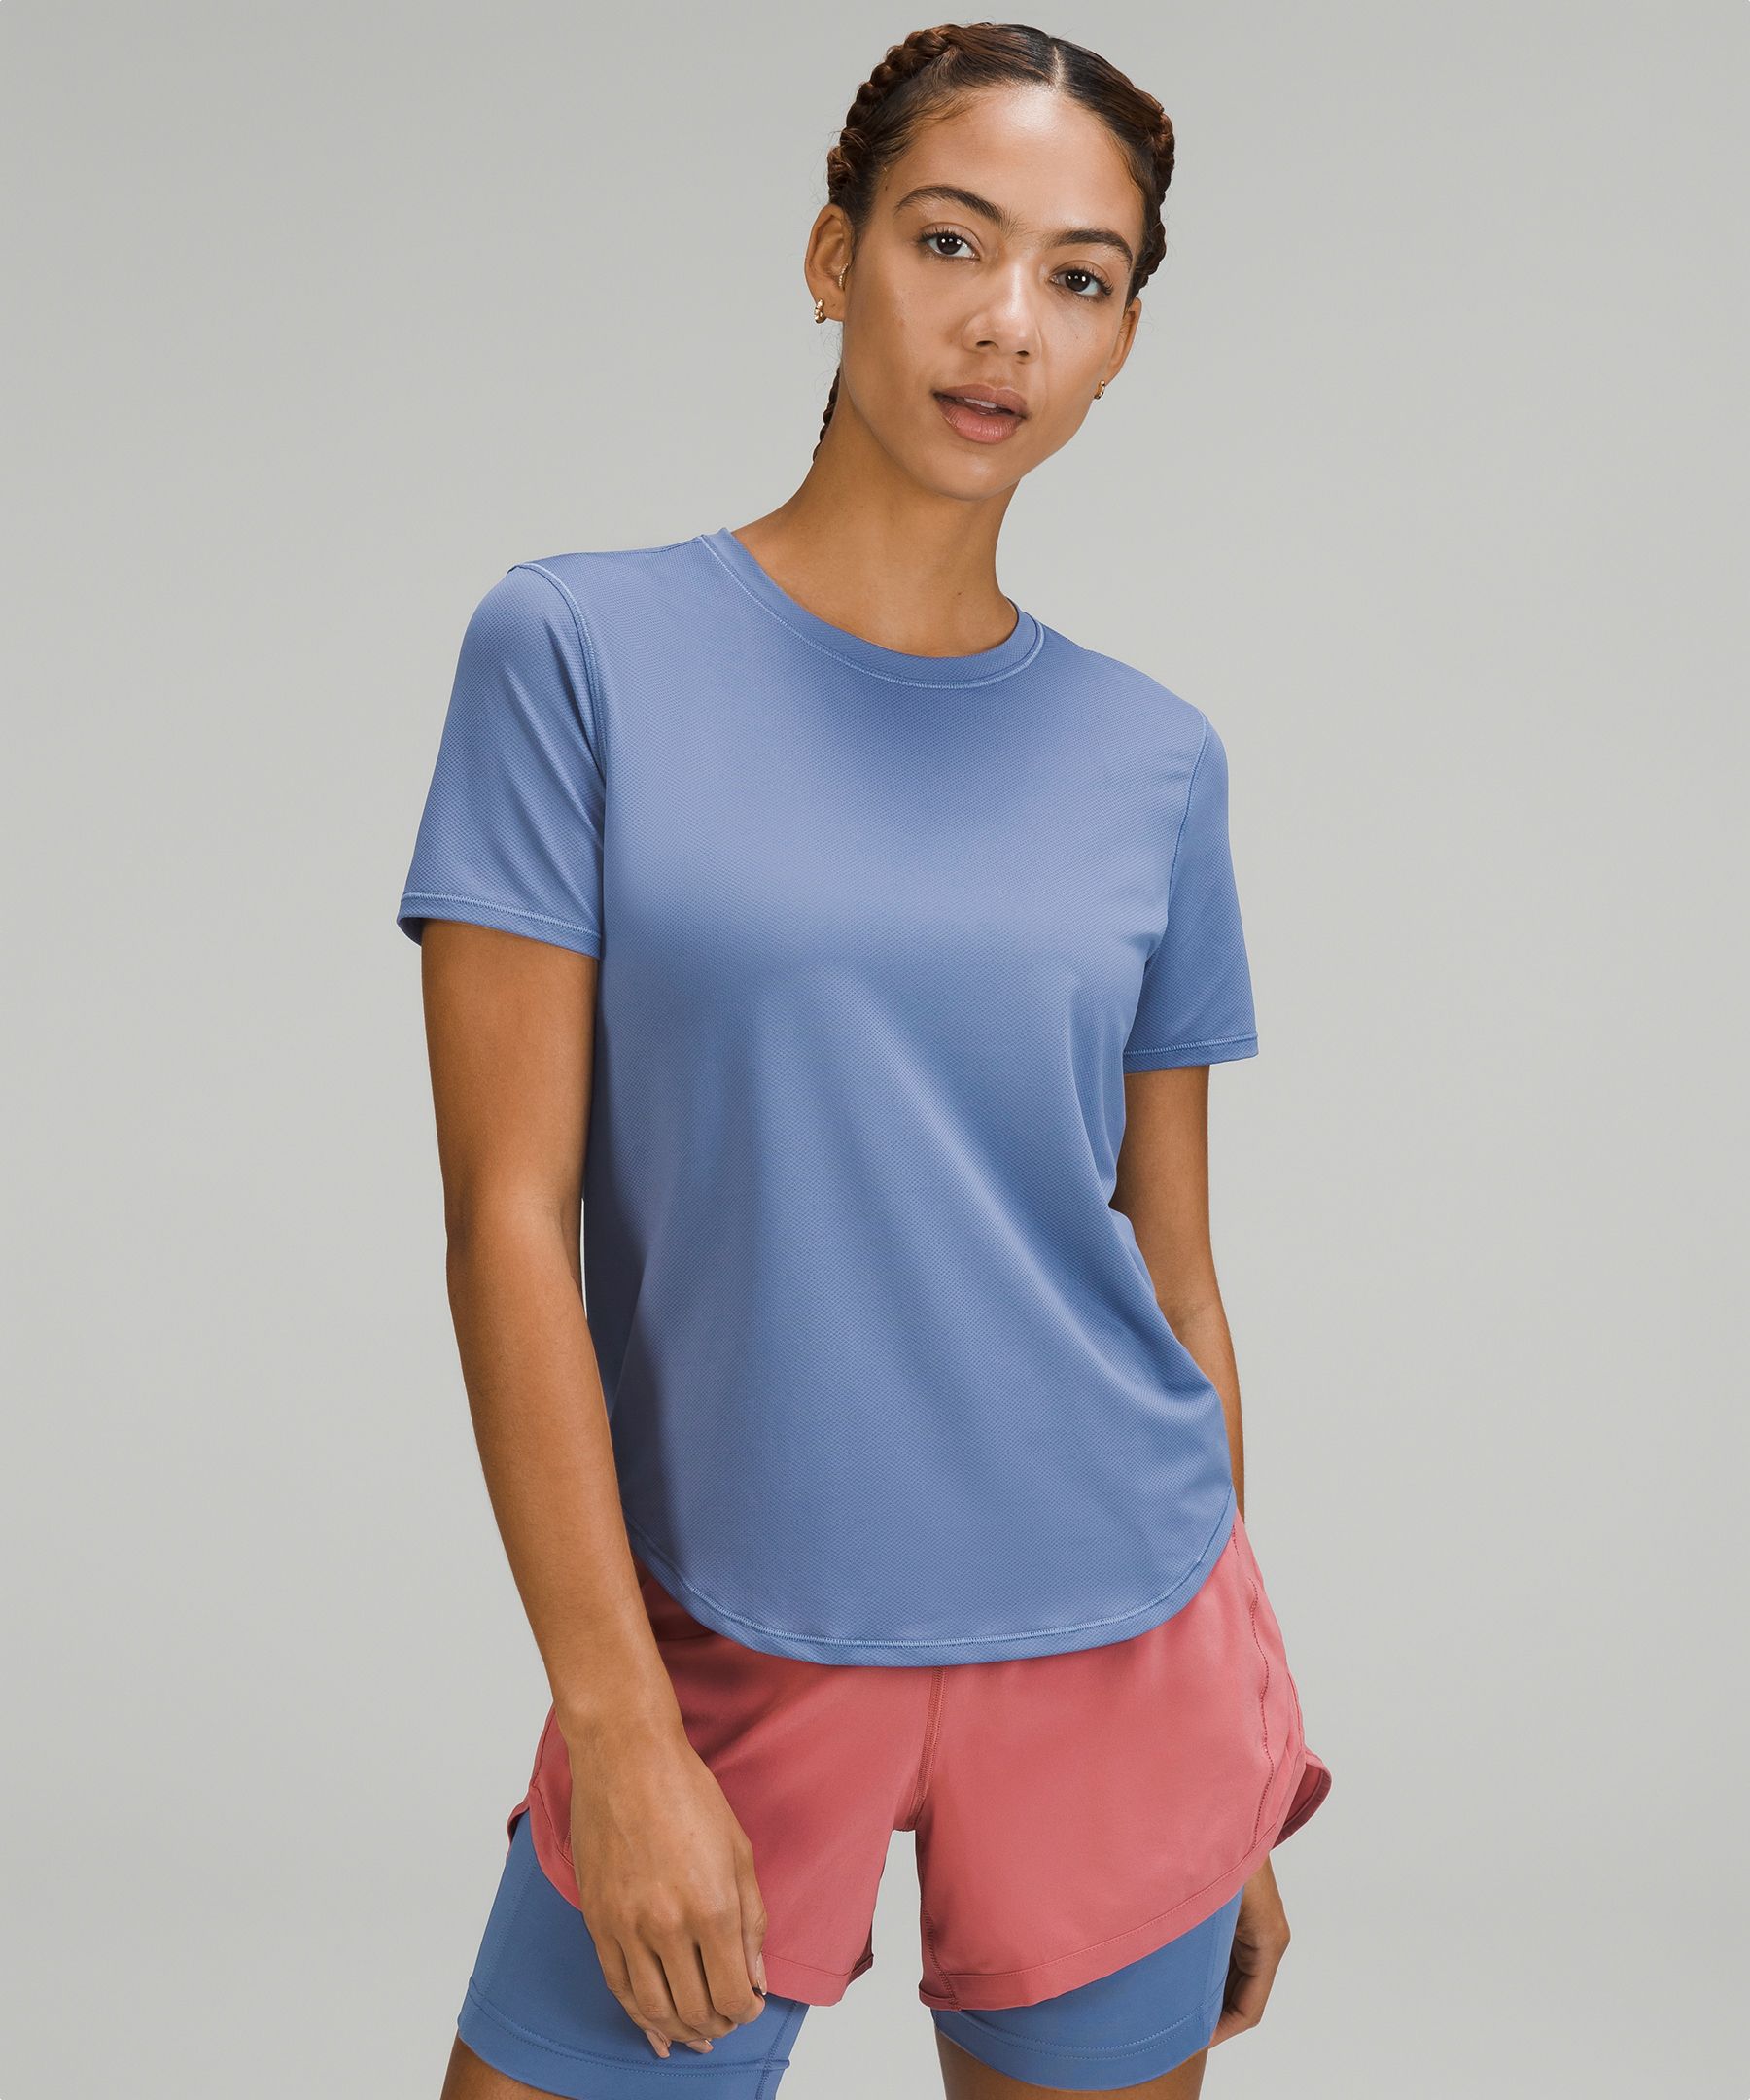 Lululemon High-neck Running And Training T-shirt In Water Drop